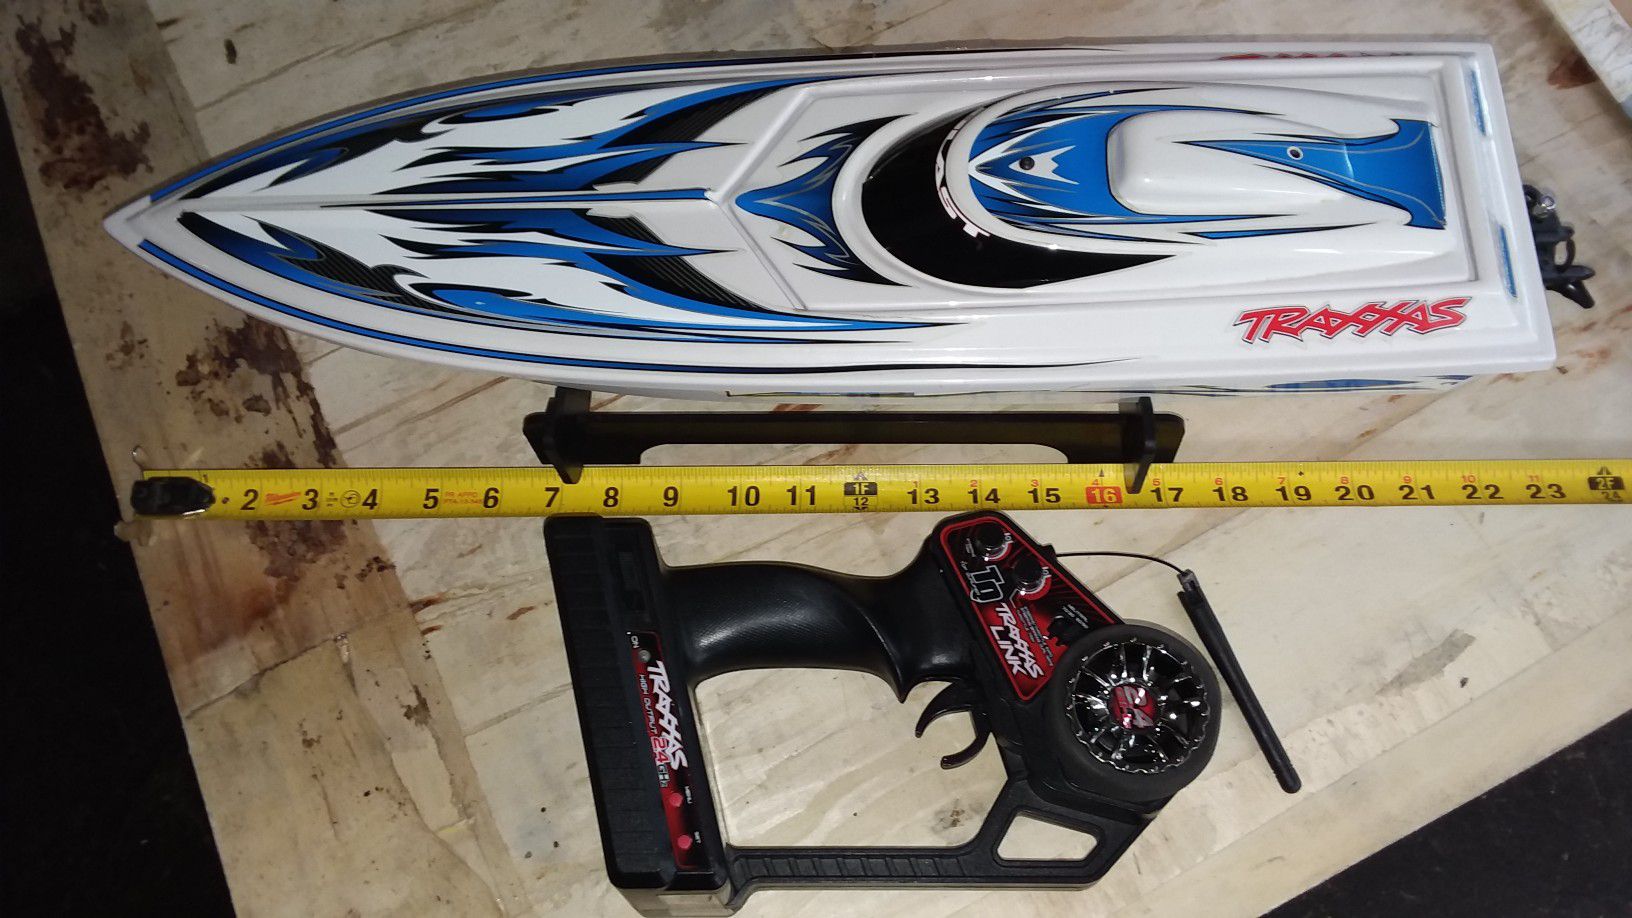 Traxxas Boat For Parts